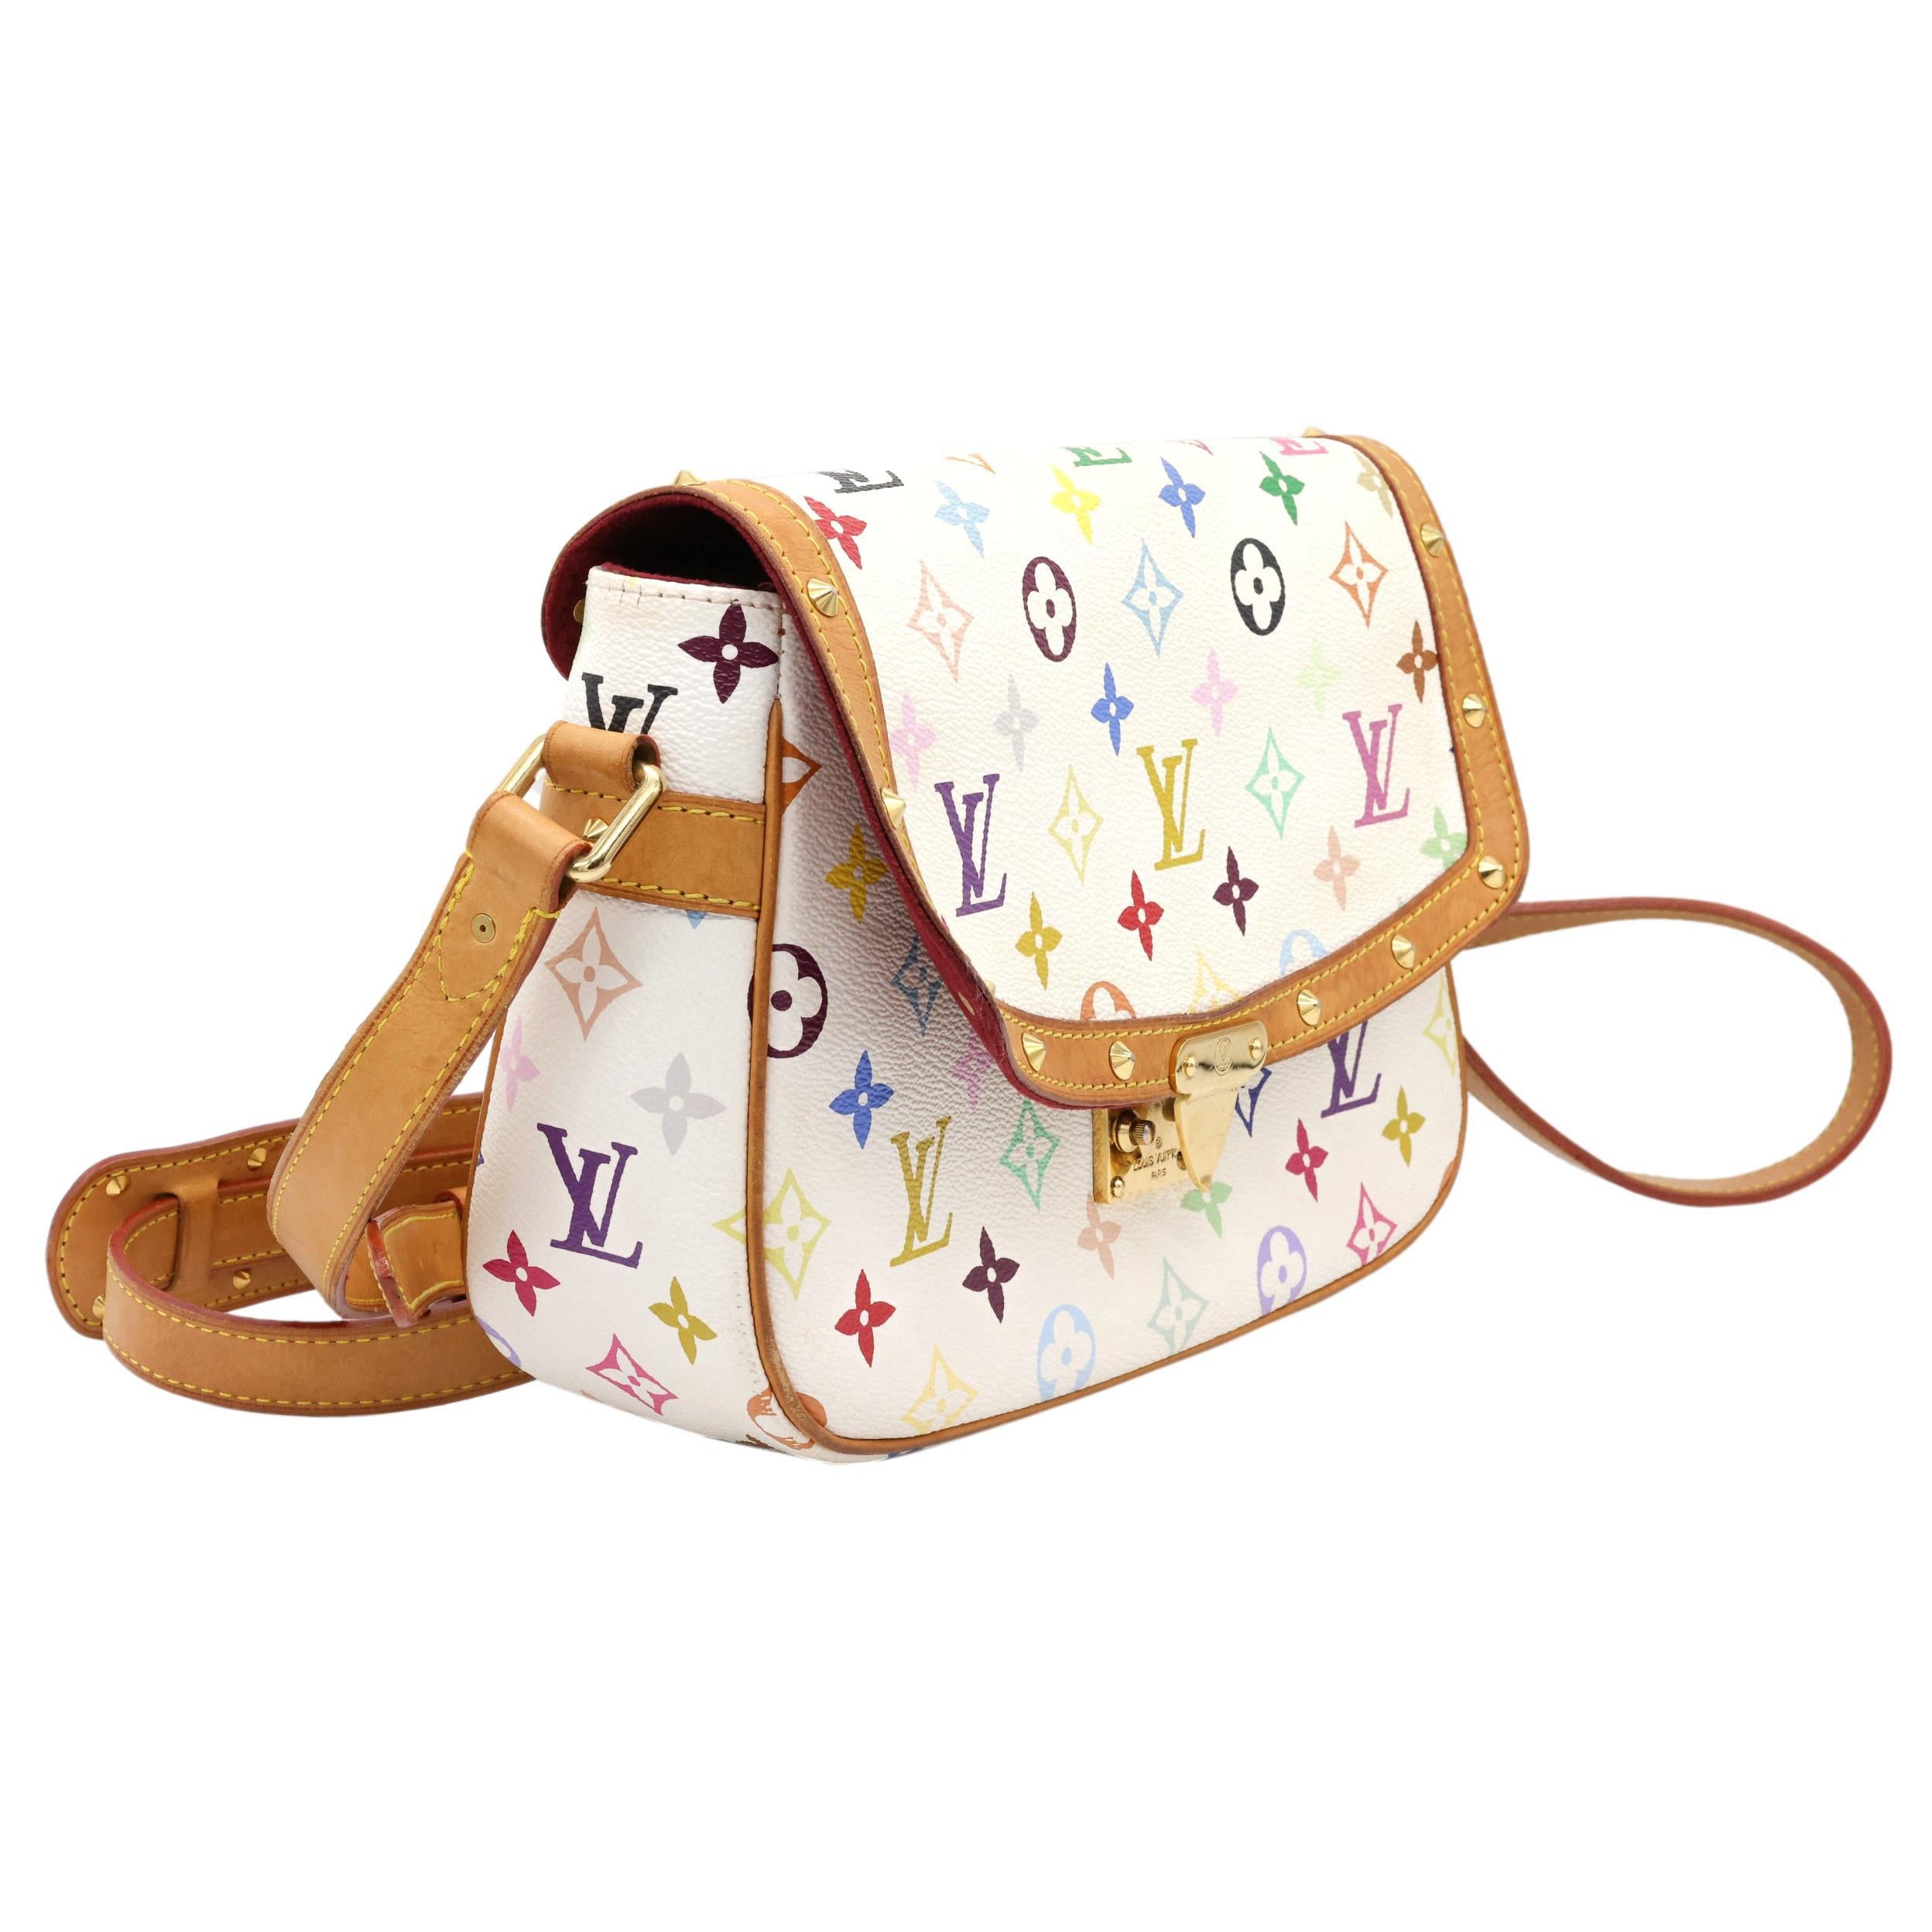 Louis Vuitton x Murakami Limited Edition Monogram Multicolor Sologne Crossbody Bag, 2003. This incredibly rare and highly sought after piece of Louis Vuitton history became a worldwide phenomenon when Japanese artist Takashi Murakami teamed up with